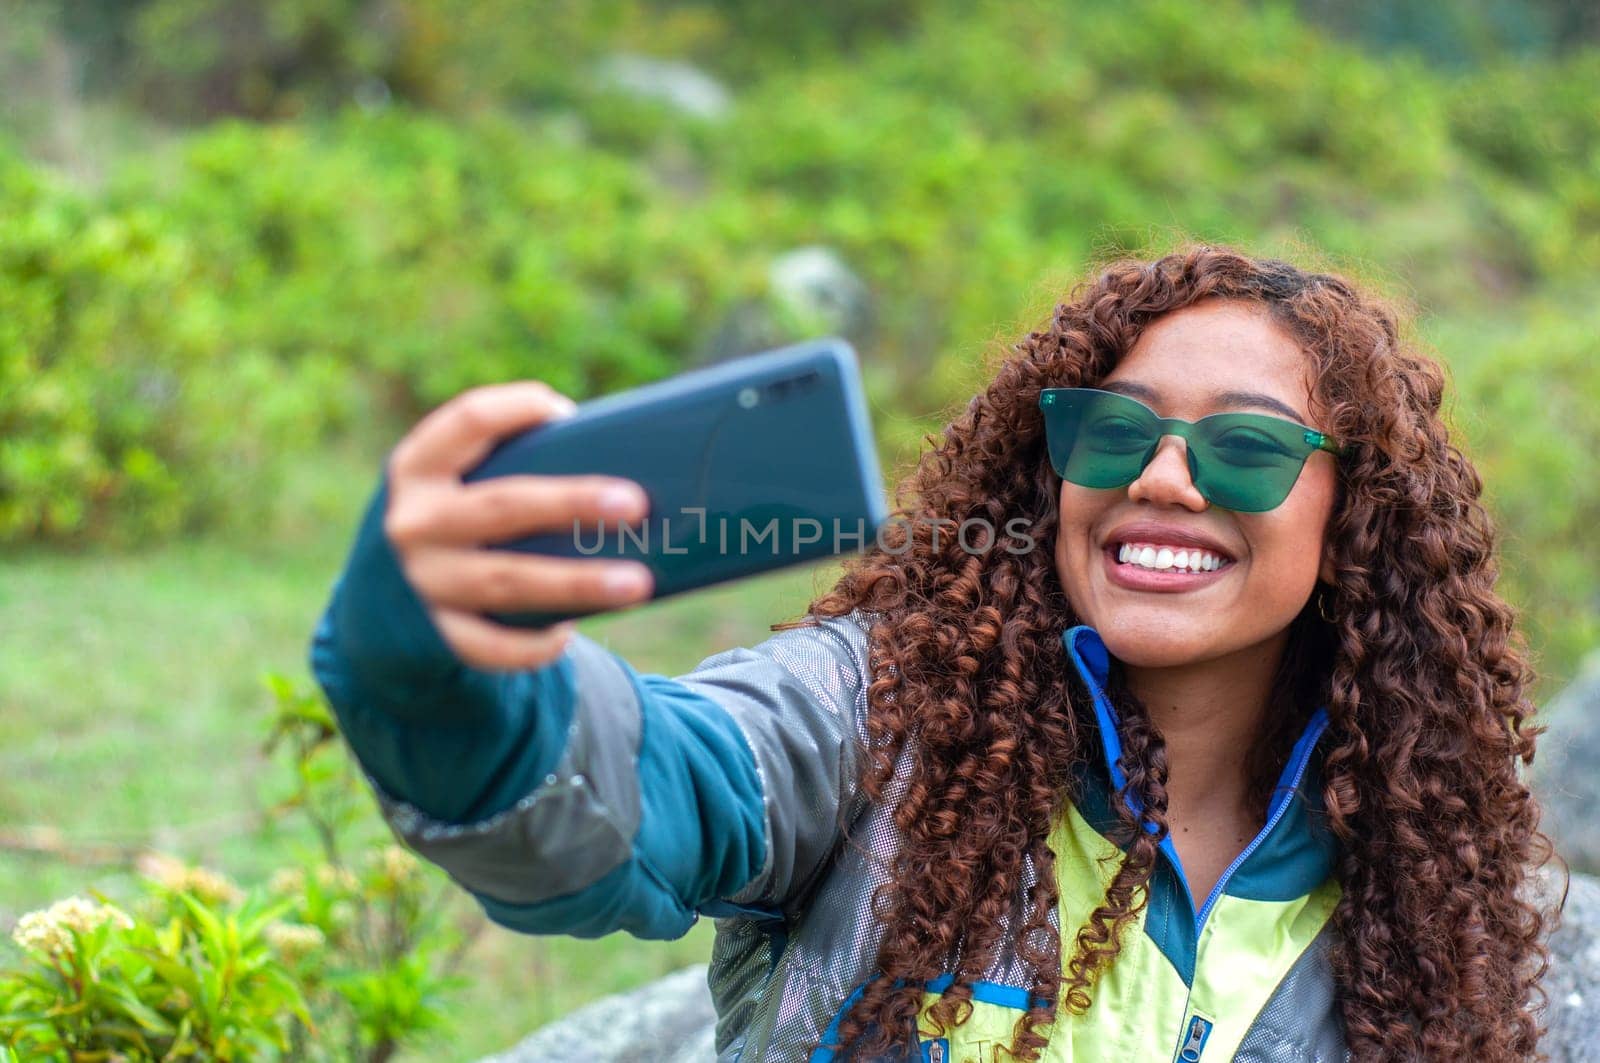 pretty latina and tourism vlogger with green glasses and curly hair showing her followers the mountain place where she is. by Raulmartin